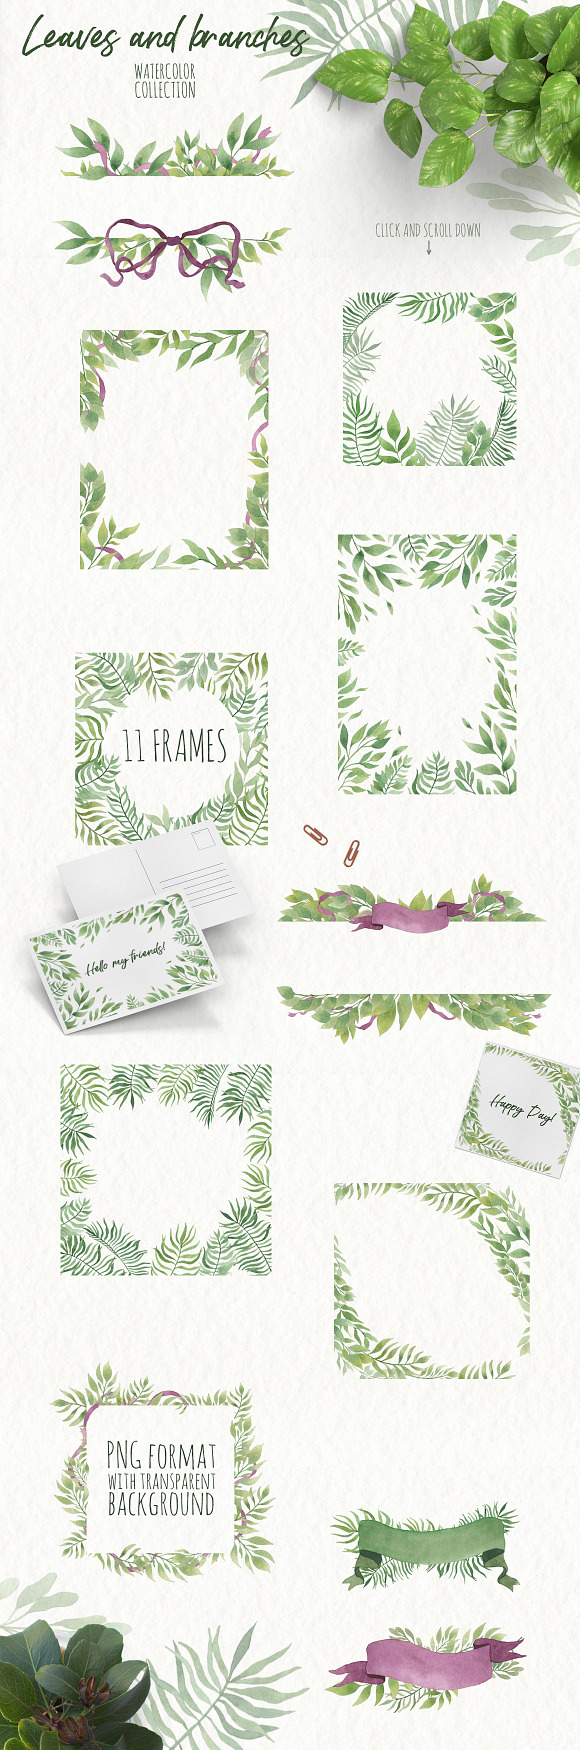 Watercolor Leaves and branches in Illustrations - product preview 3